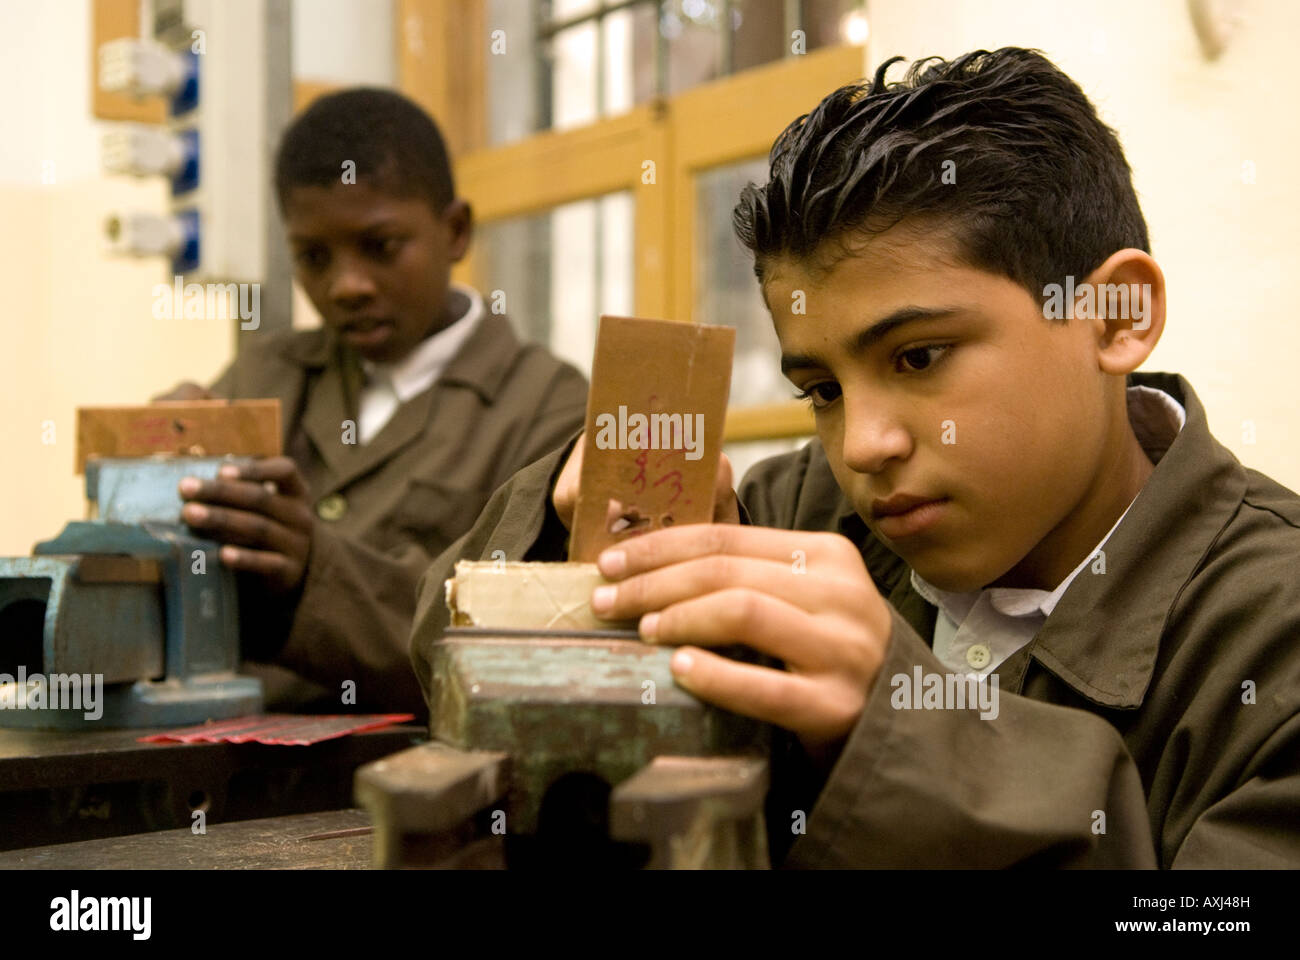 Young boy pupils engaged in copper workshop at the Islamic Arts and Crafts School, Tripoli, Libya. Stock Photo